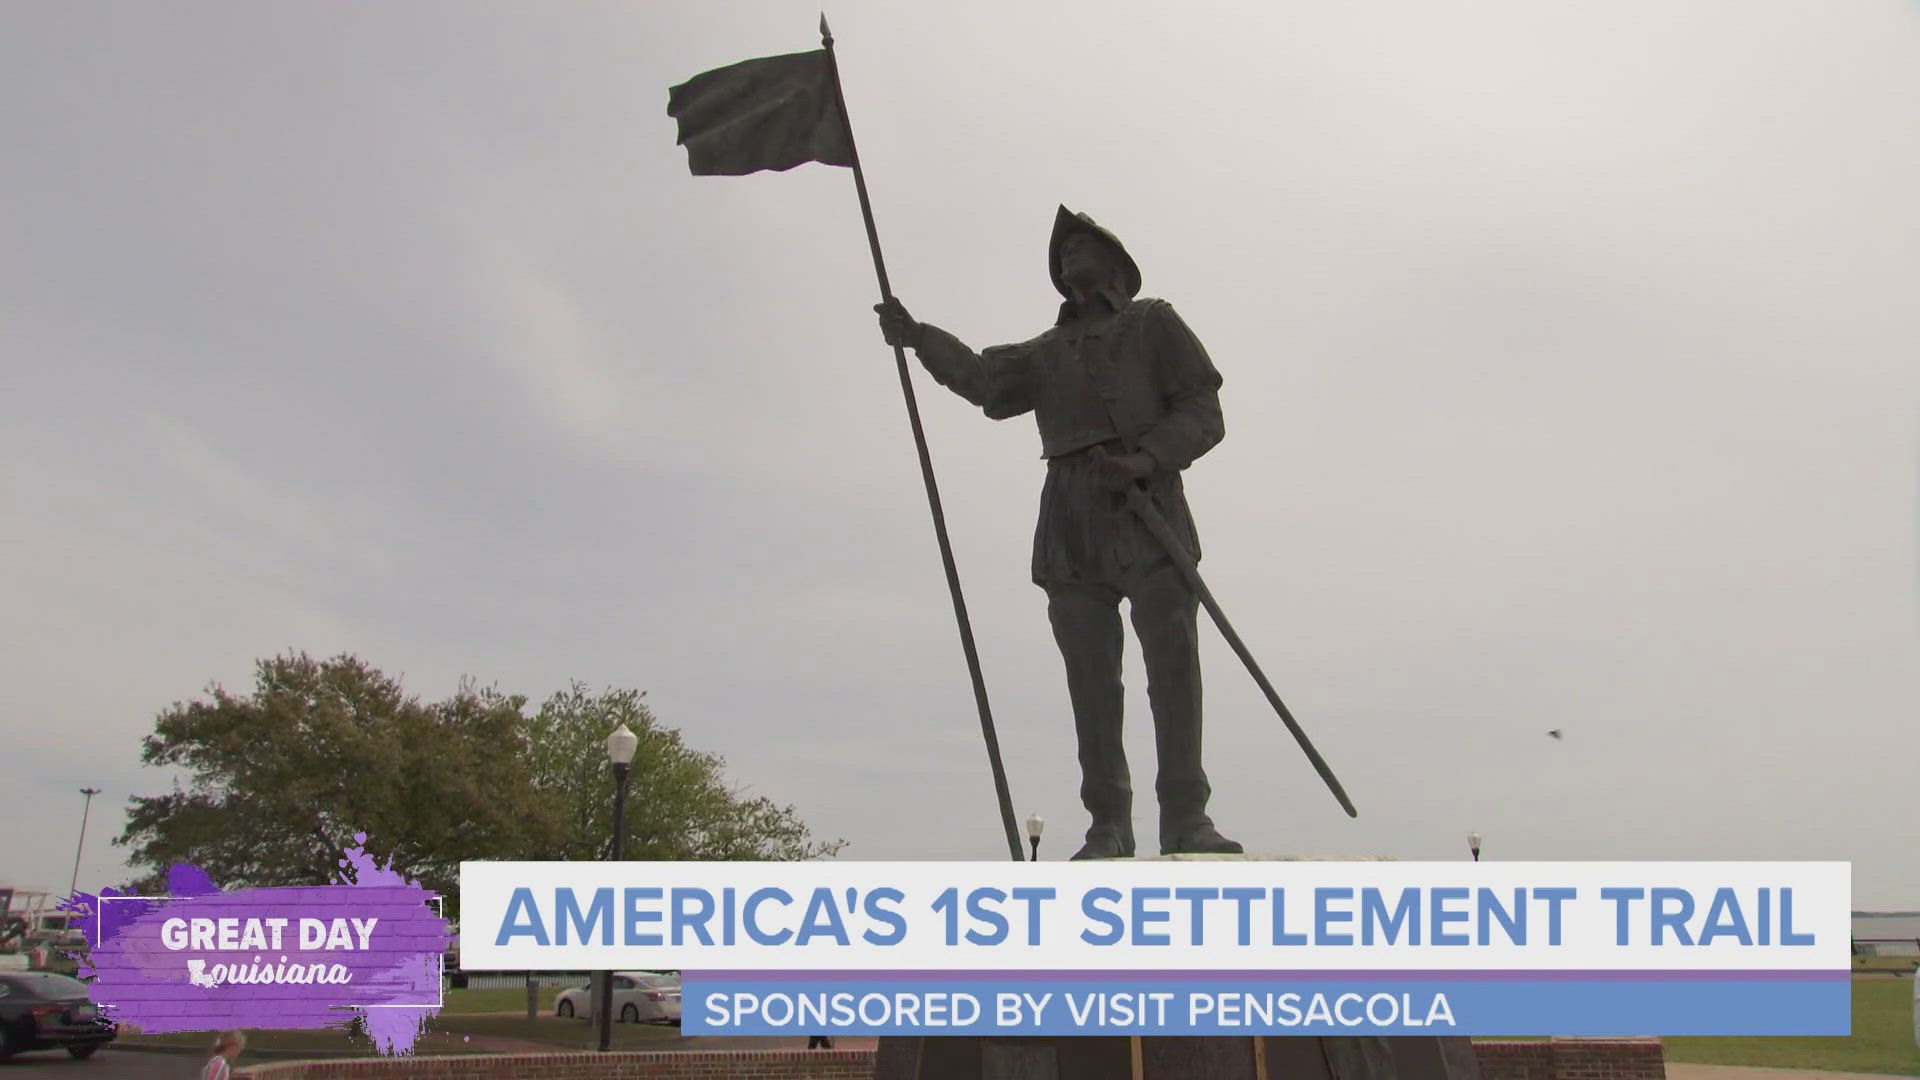 We take a stroll through 500 years of history with Pensacola, Florida's America's First Settlement Trail. Then Malik enjoys food & cocktails at Atlas Oyster House.